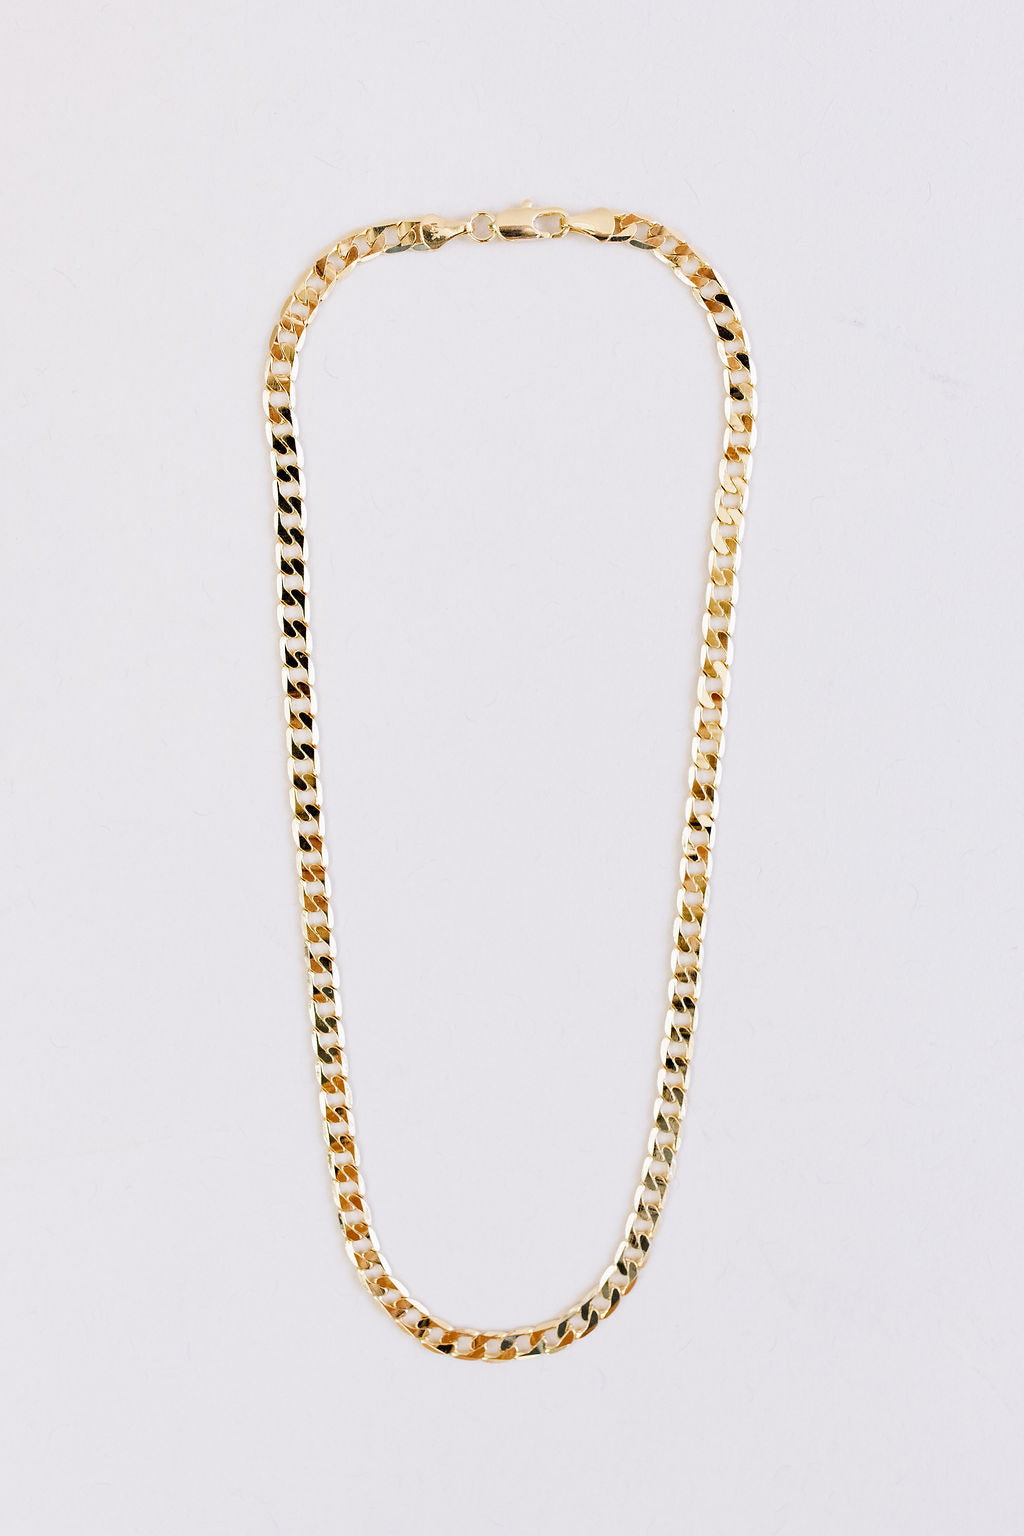 Marta Gold Cuban Link Chain Necklace - Poppy and Stella